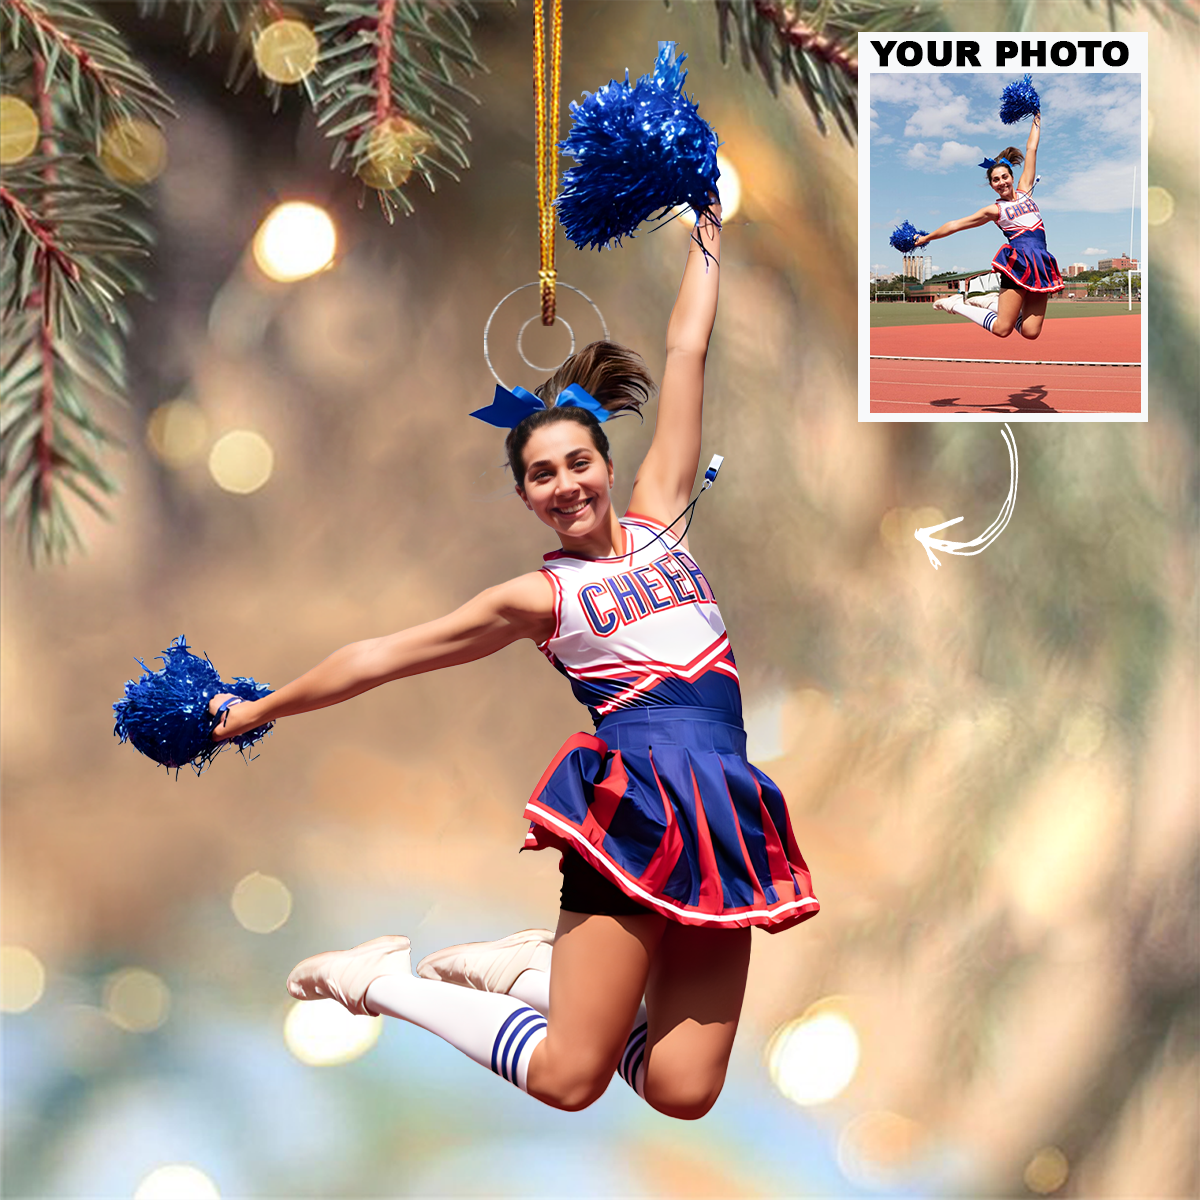 Cheerleading Ornament - Personalized Custom Photo Mica Ornament - Christmas Gift For Cheerleaders, Family Members